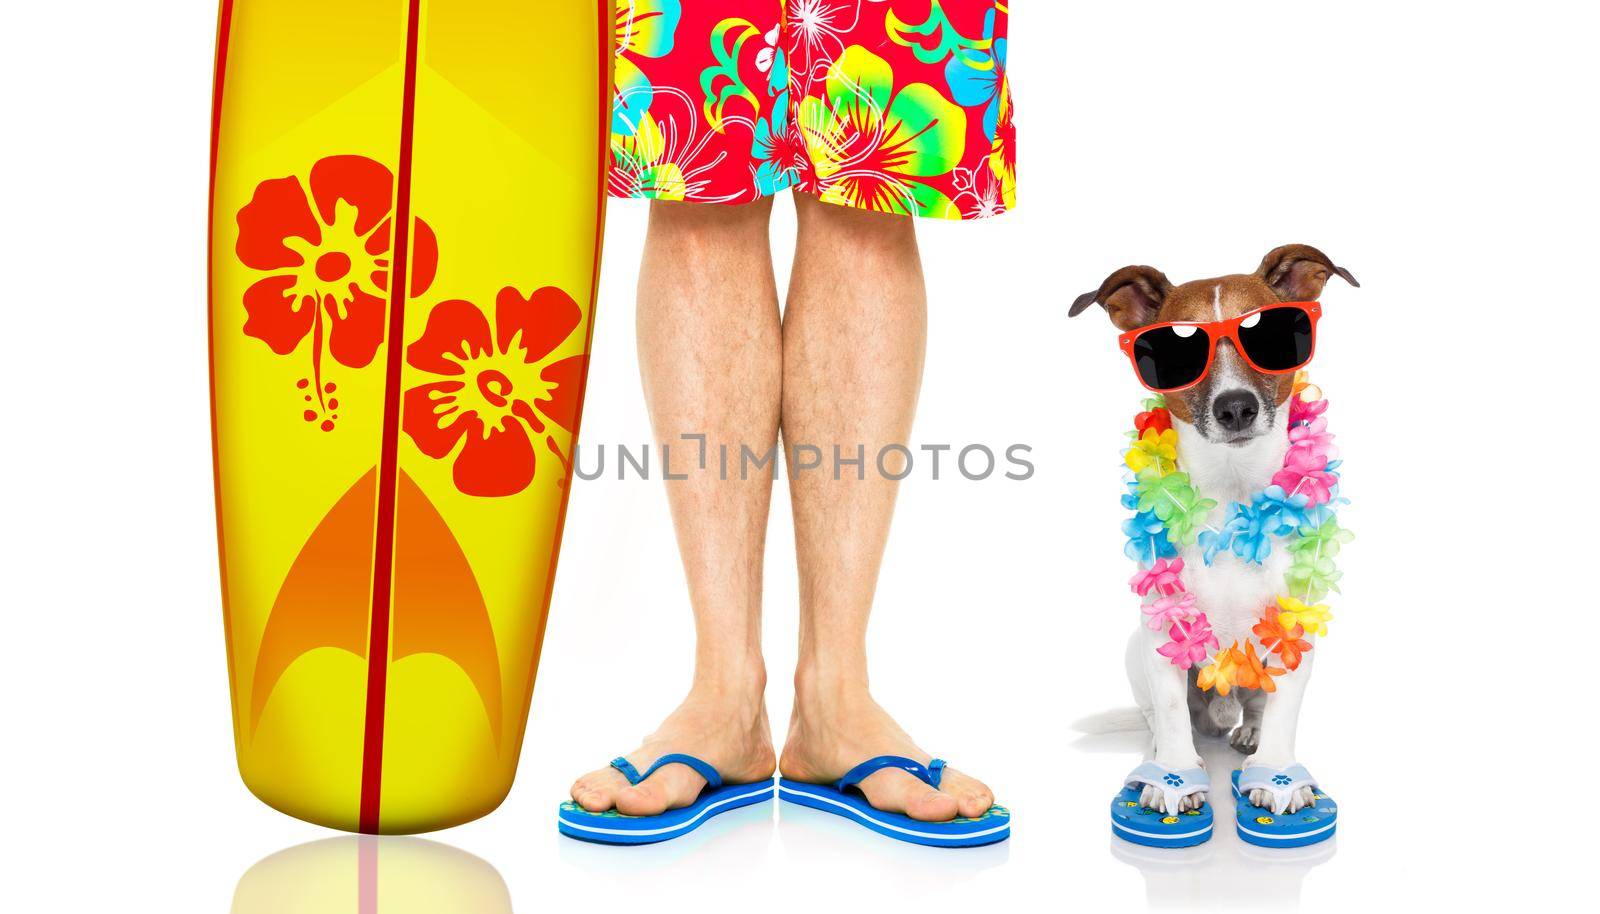 jack russell dog and owner ready to go on summer vacation  with surfboard as surfer , isolated on white background, wearing sunglasses